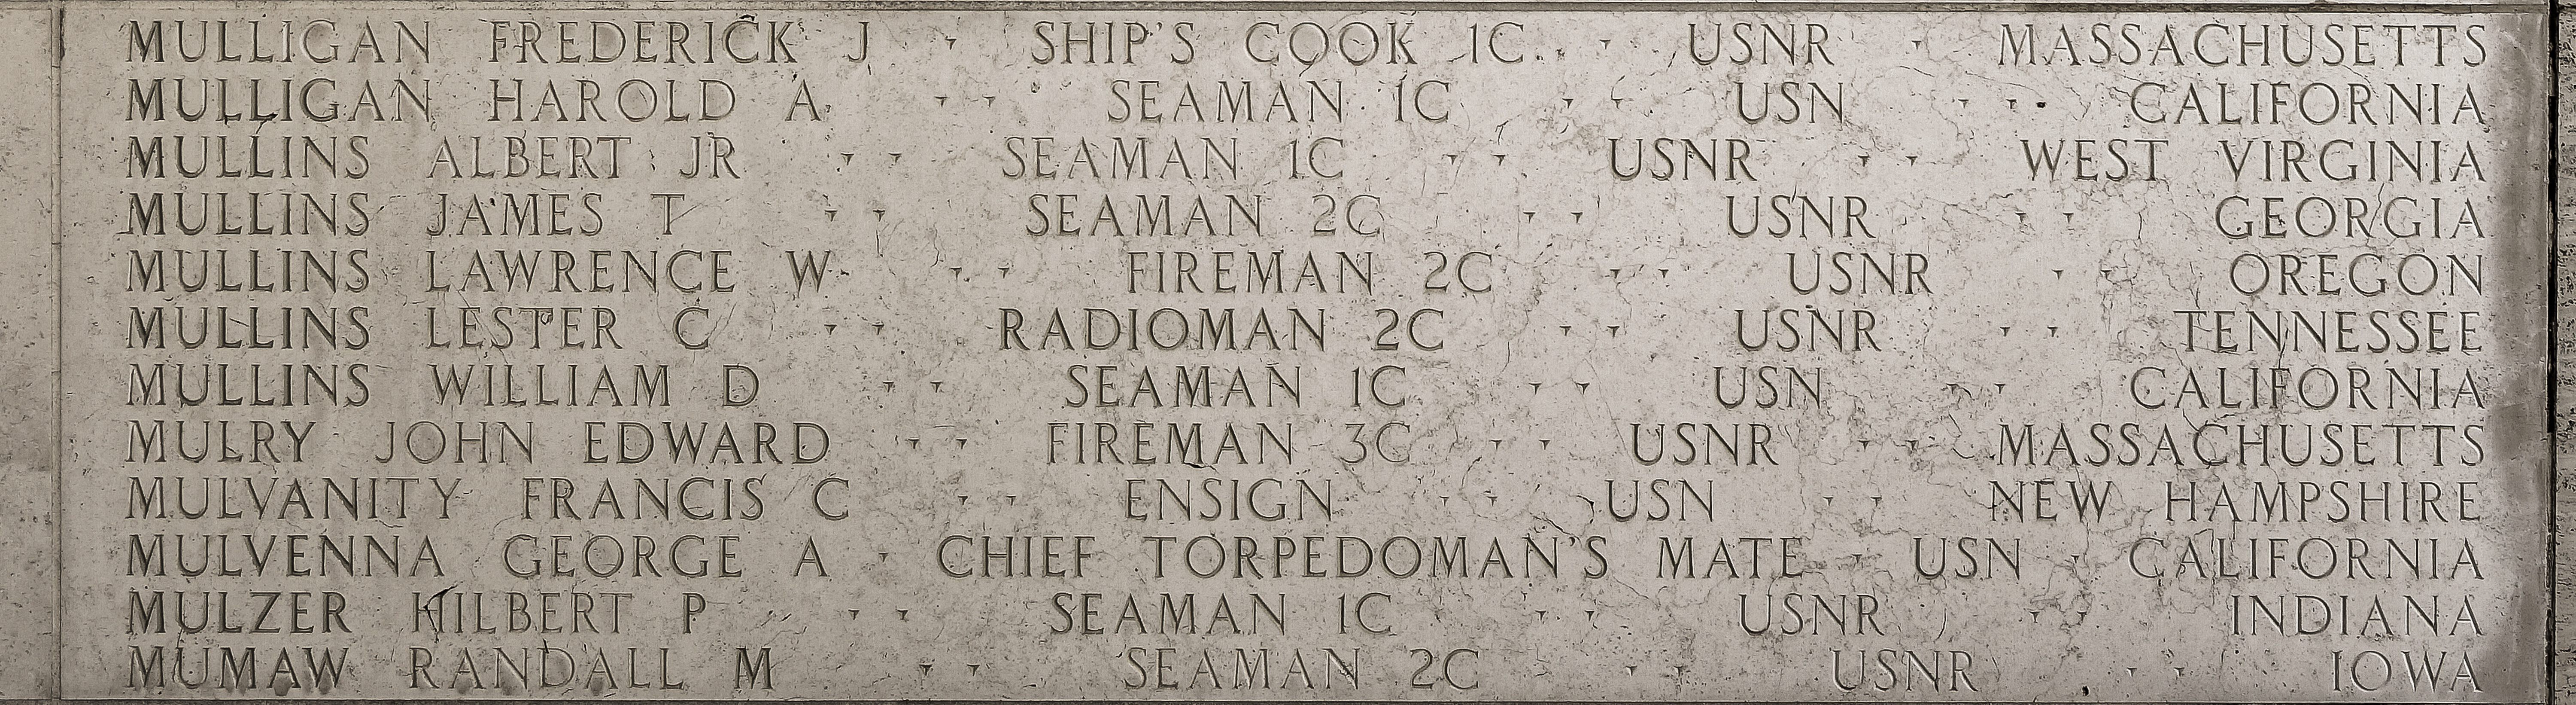 Frederick J. Mulligan, Ship's Cook First Class